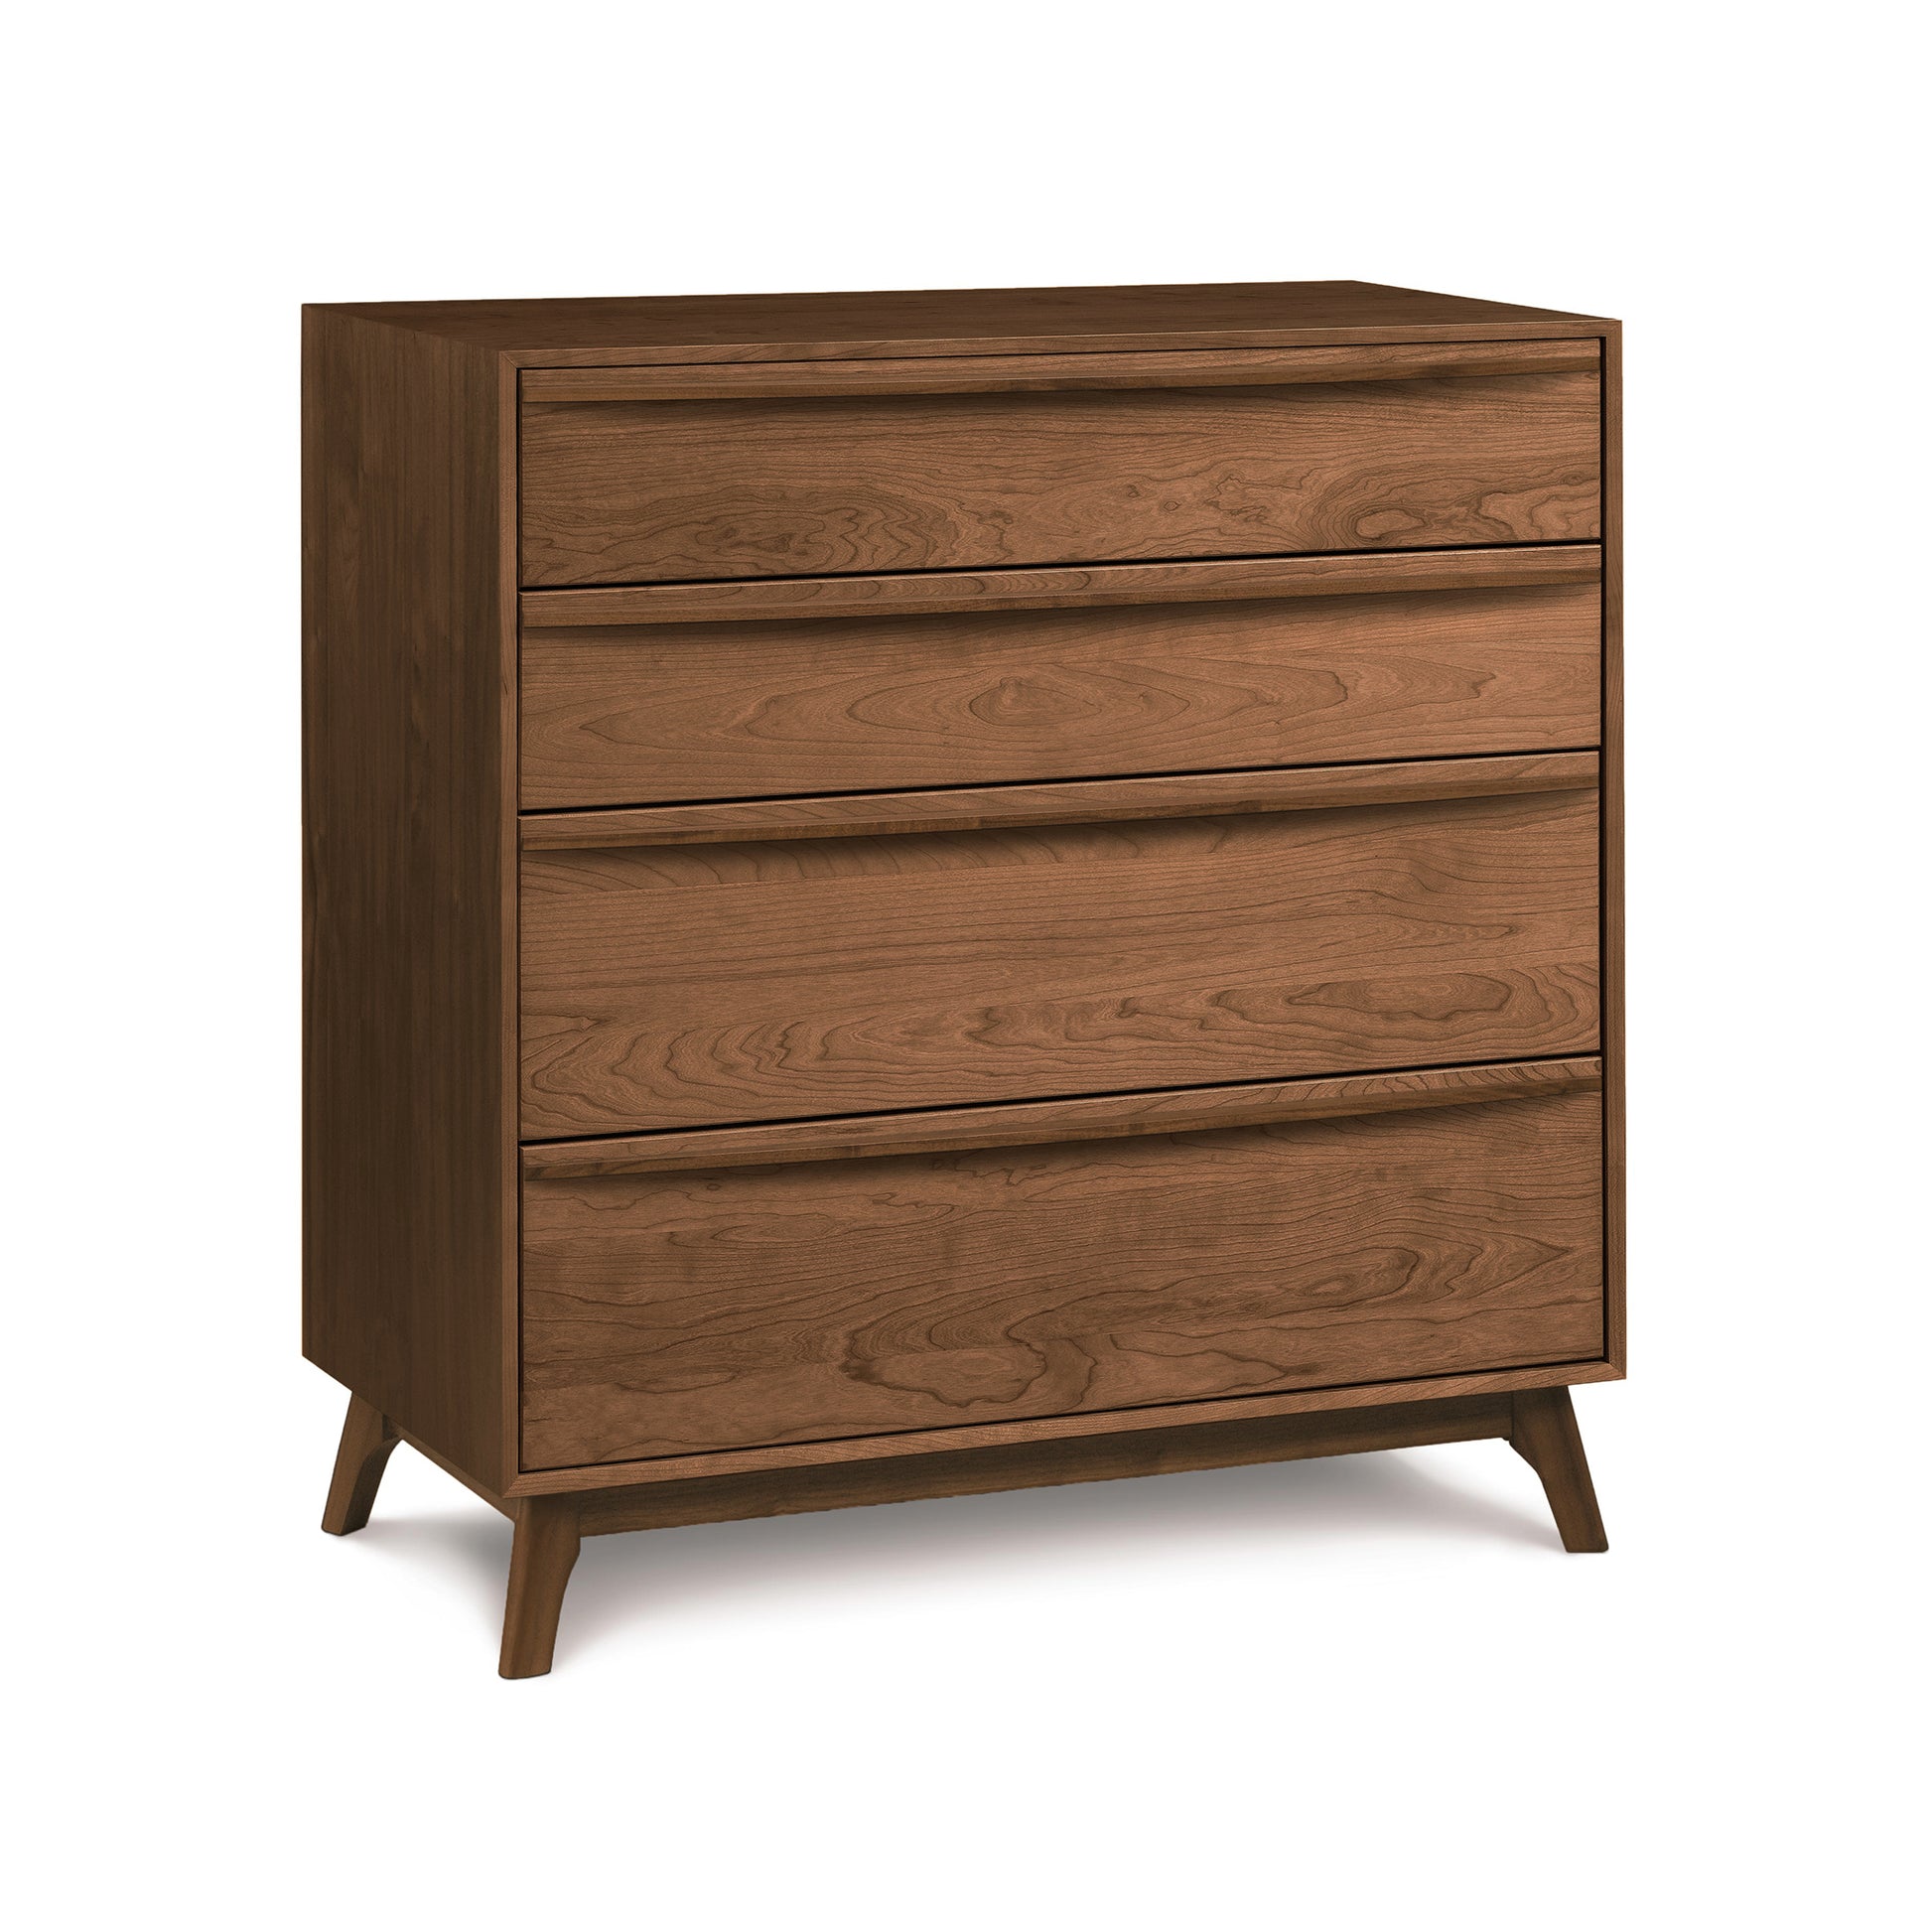 A Copeland Furniture Catalina 4-Drawer Chest, handmade in Vermont, showcasing its modern bedroom appeal.